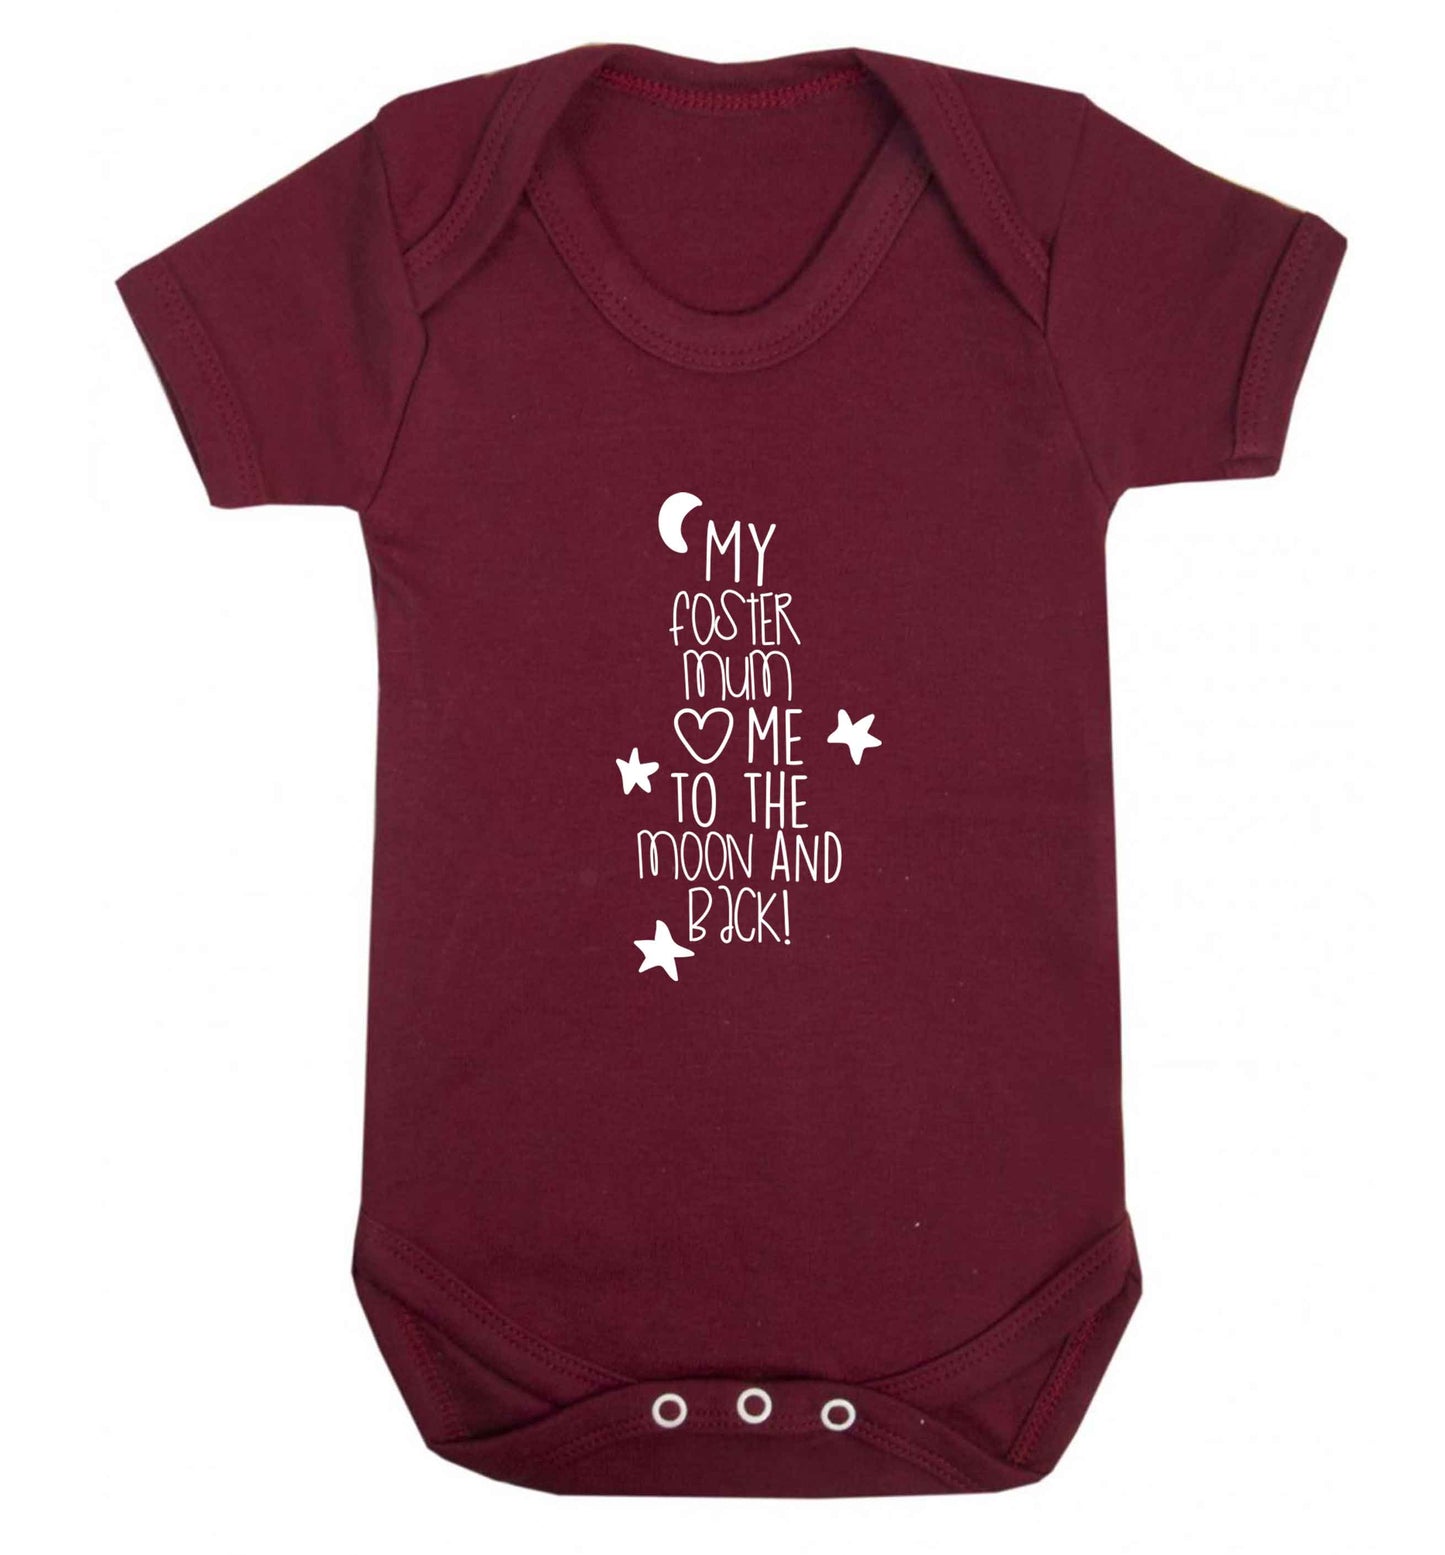 My foster mum loves me to the moon and back baby vest maroon 18-24 months